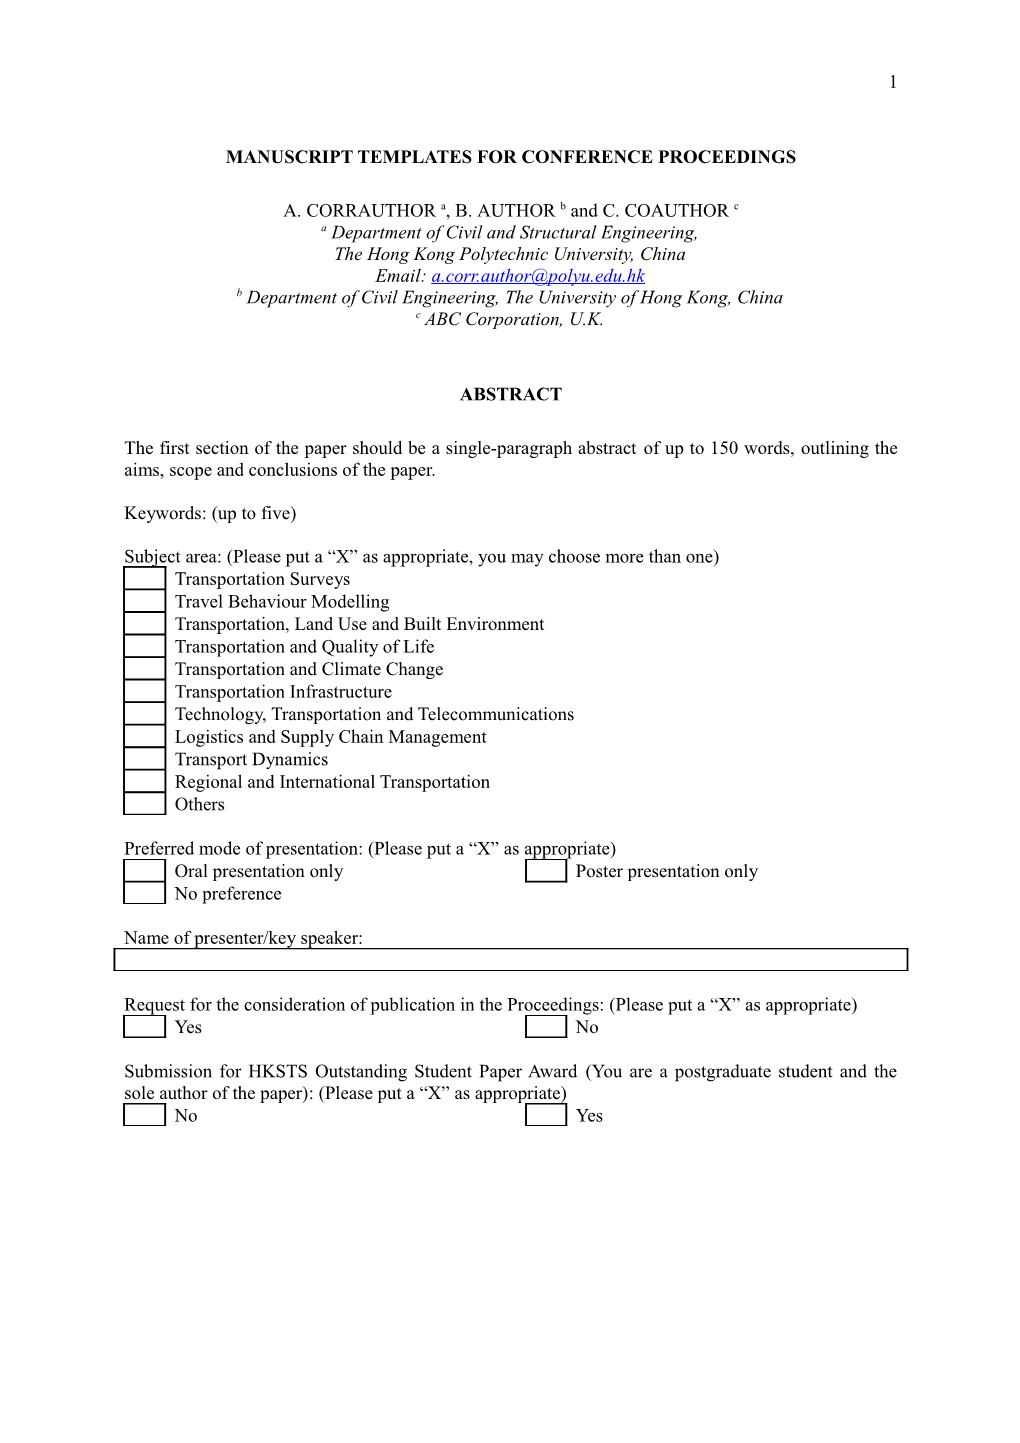 Manuscript Templates for Conference Proceedings